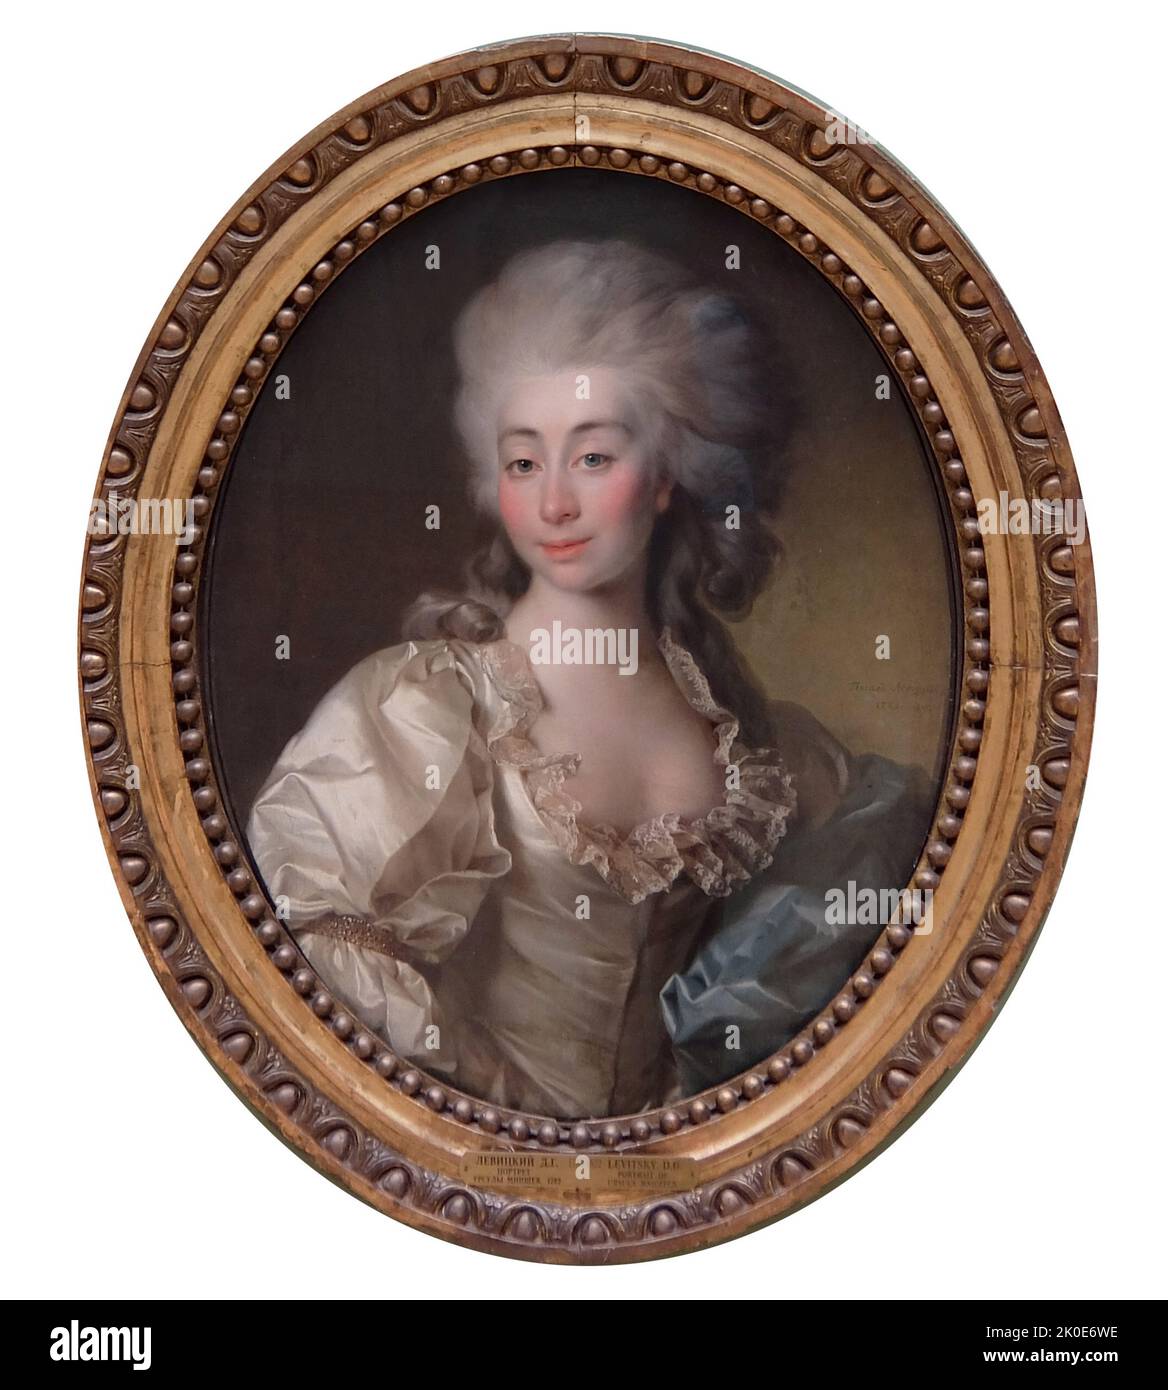 Portrait of Countess Ursula Mniszek by Dmitri Grigorievich Levitsky. 1782. Dmitry Grigoryevich Levitsky (May 1735 - 17 April 1822) was a Russian Imperial artist and portrait painter of Zaporozhian Cossack descent. Stock Photo